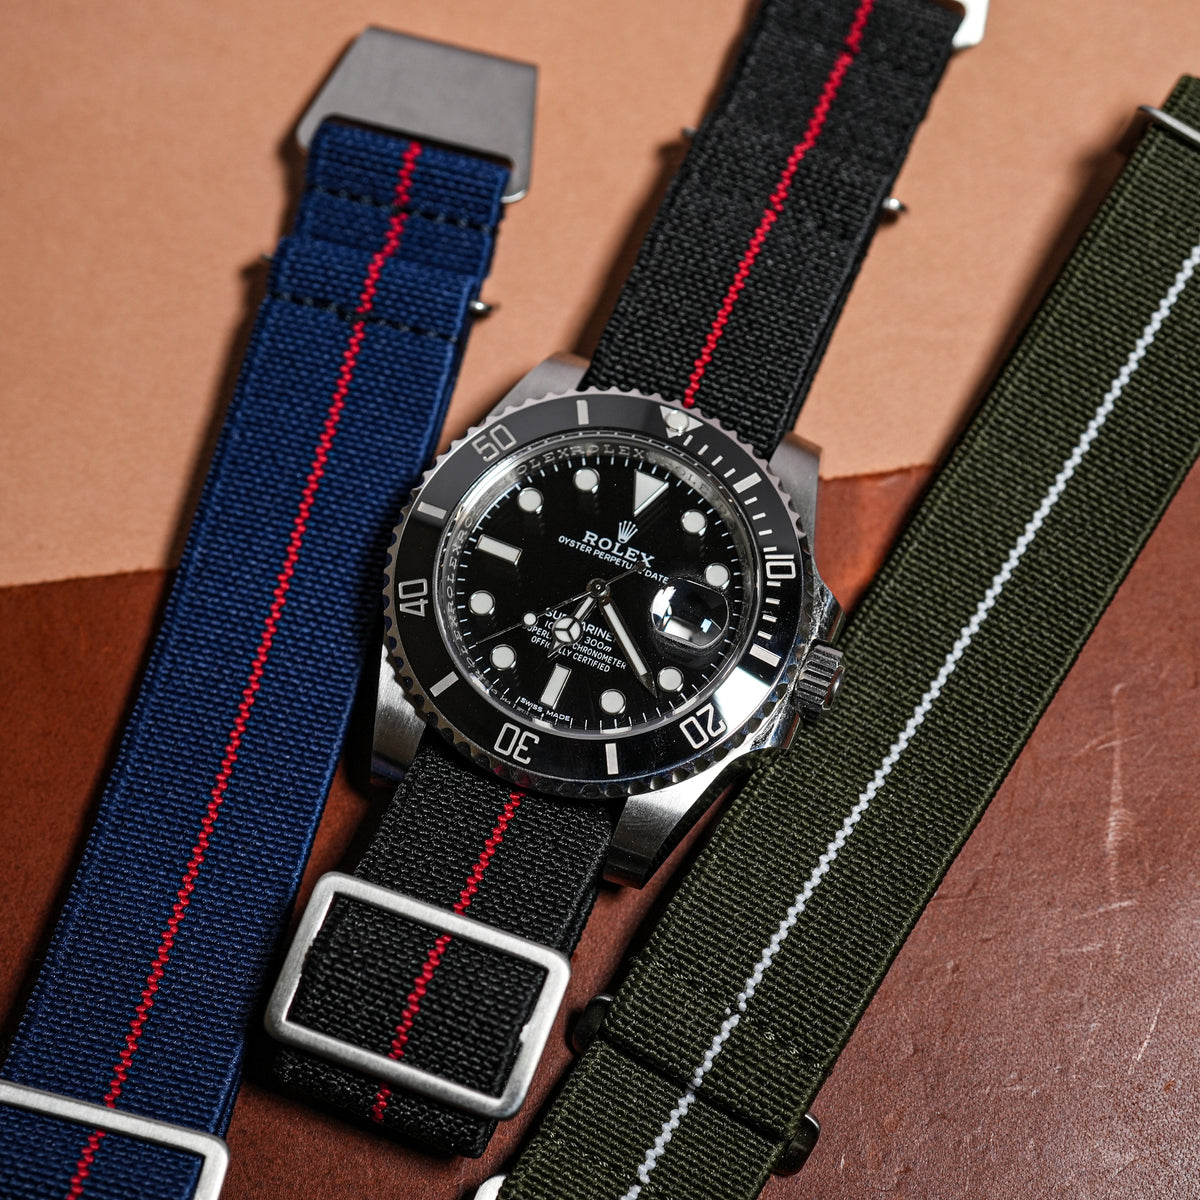 Marine Nationale Strap in Black Red - Nomad Watch Works MY